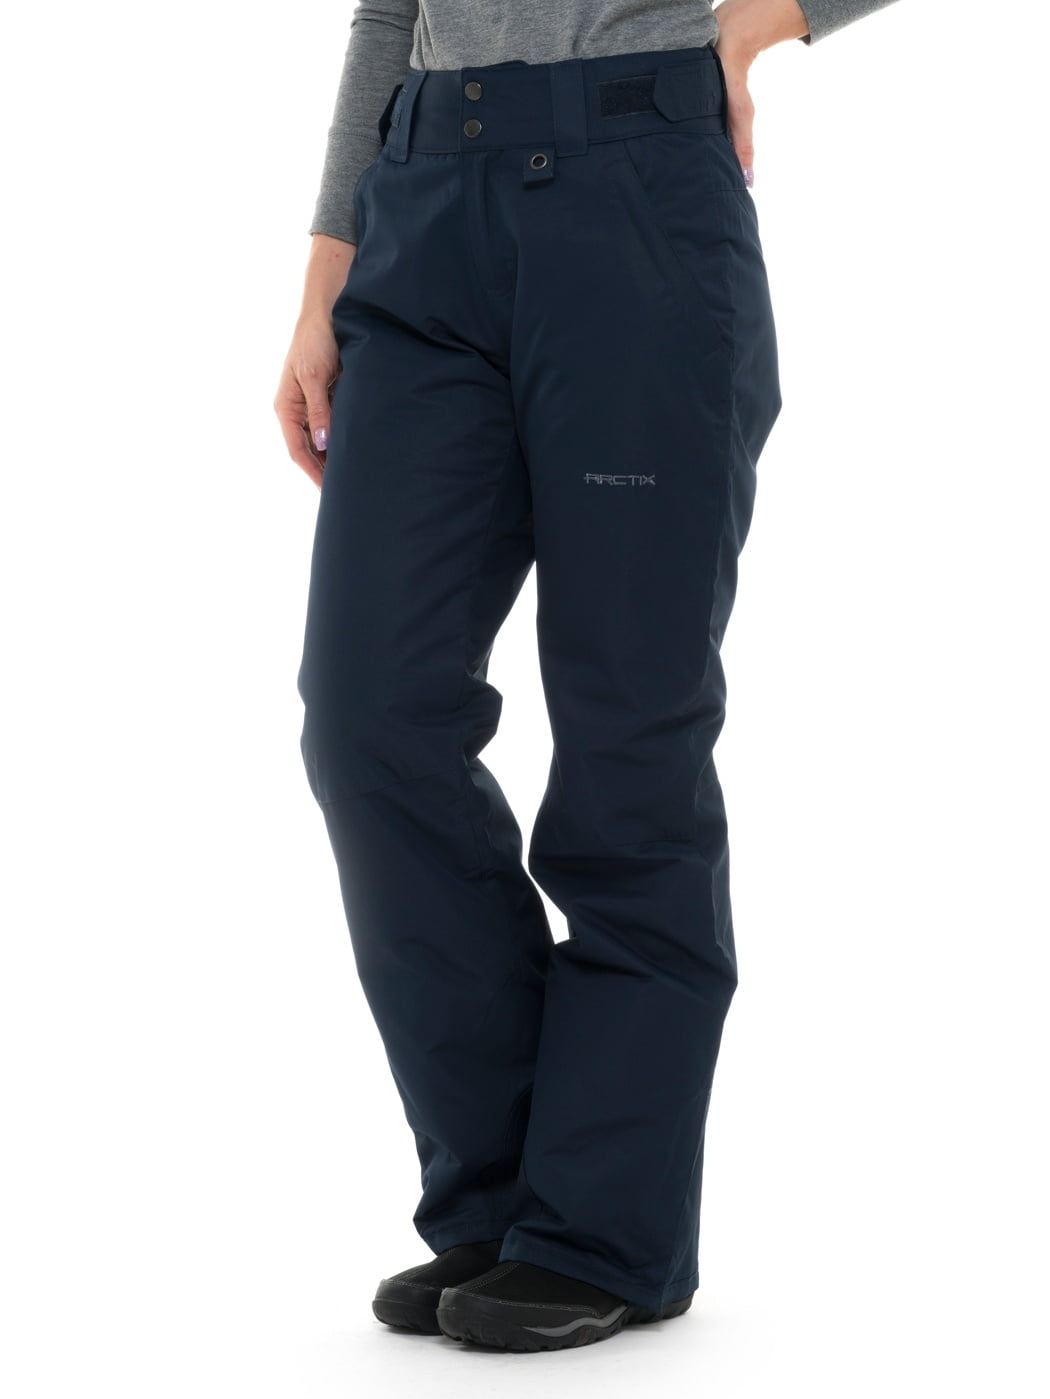 ARCTIX Womens Insulated Snow Ski Pants Black 1800 2x Water Resistant 2xl for sale online 